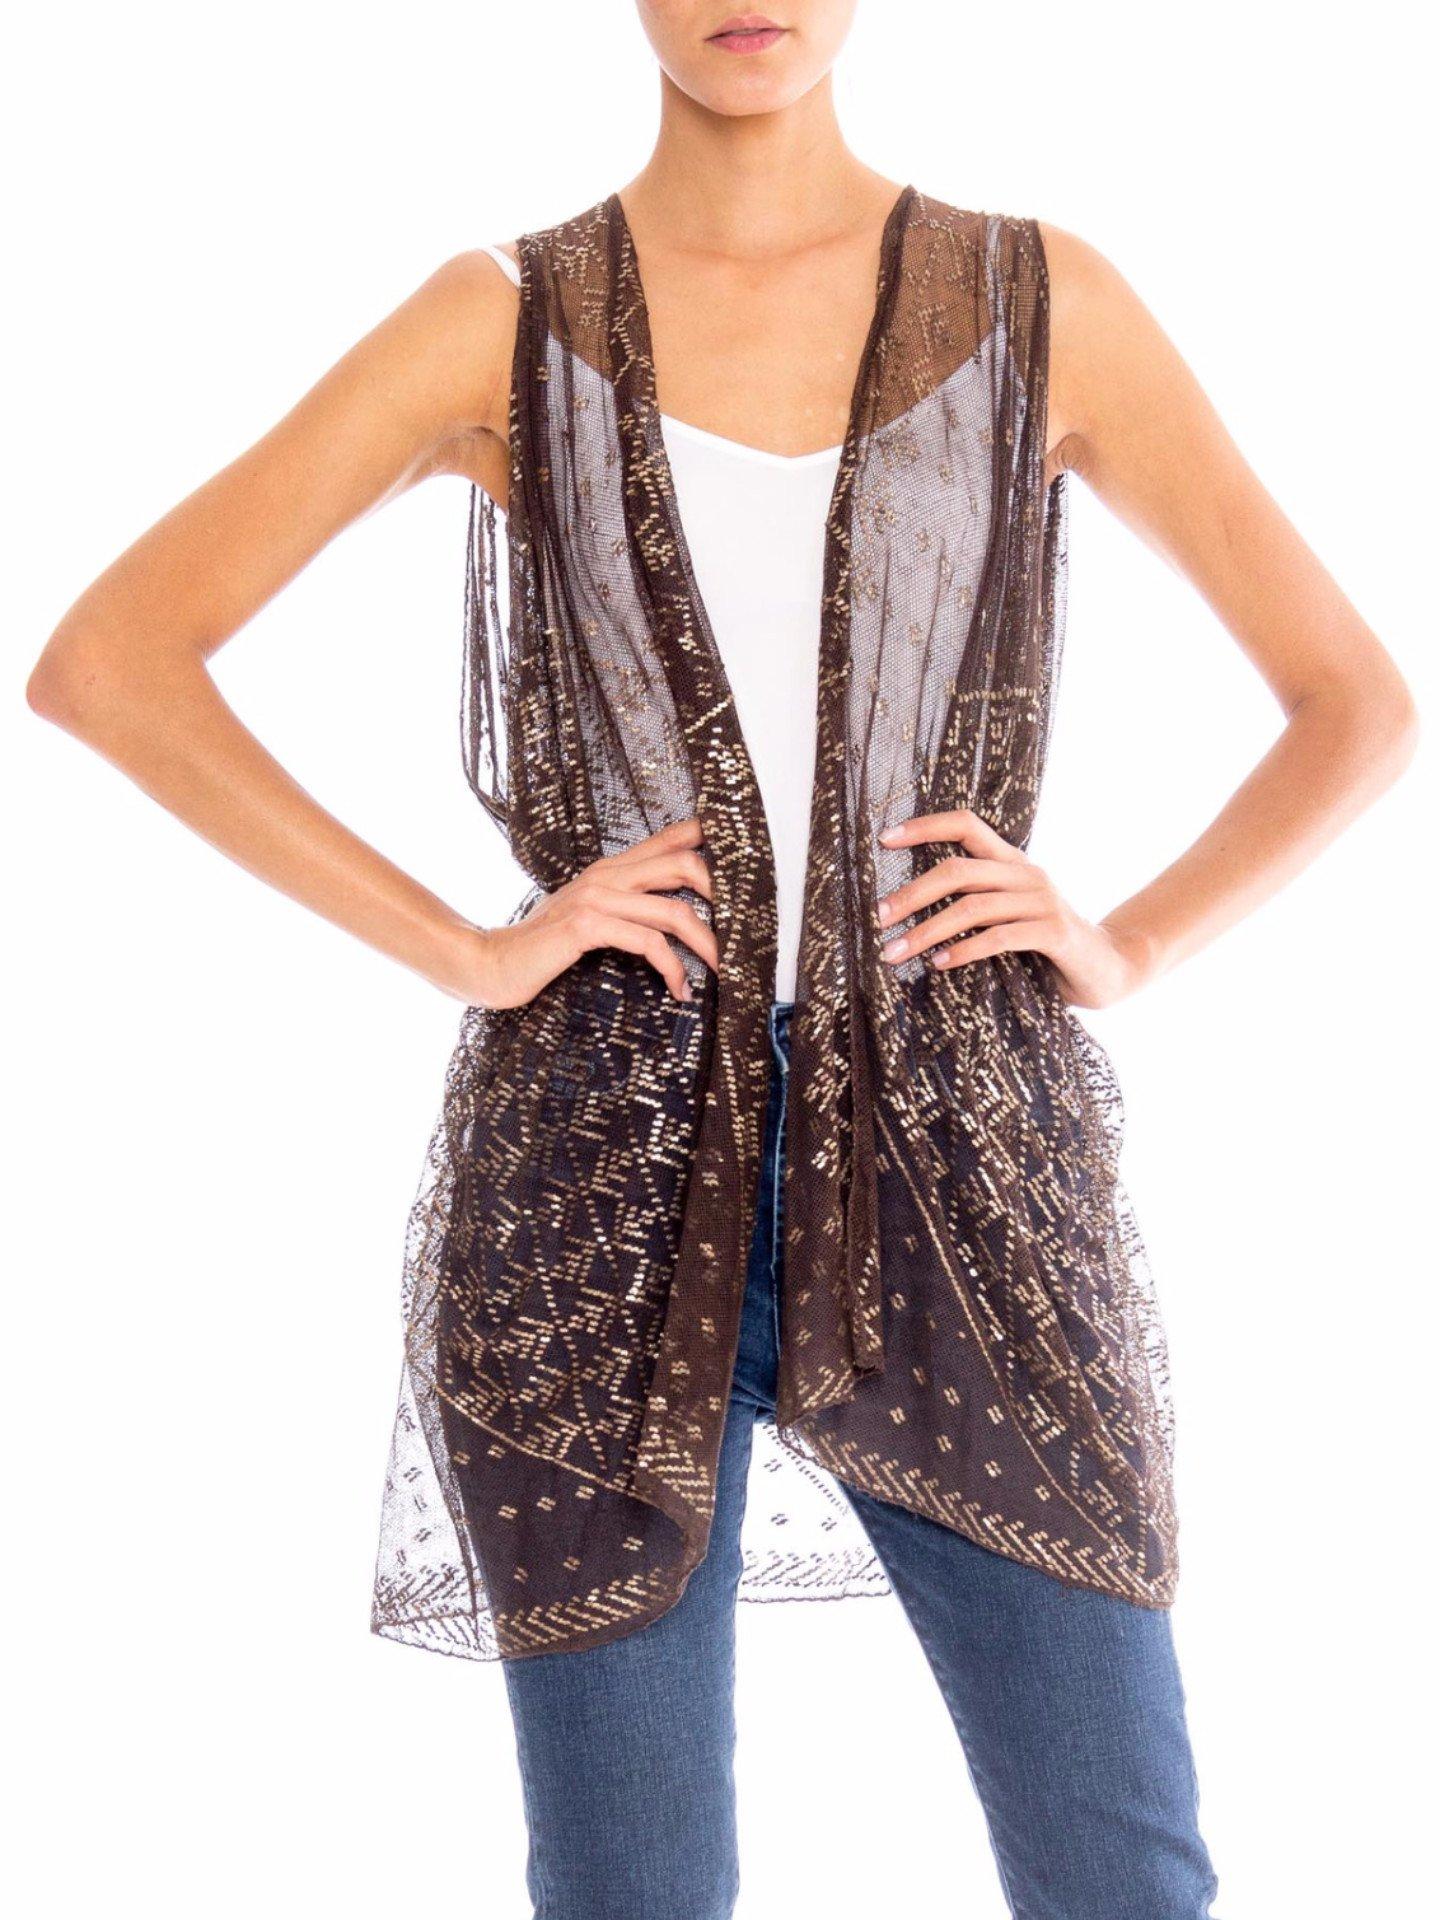 MORPHEW COLLECTION Chocolate Brown & Silver Egyptian Assuit Sheer Draped Vest
MORPHEW COLLECTION is made entirely by hand in our NYC Ateliér of rare antique materials sourced from around the globe. Our sustainable vintage materials represent over a